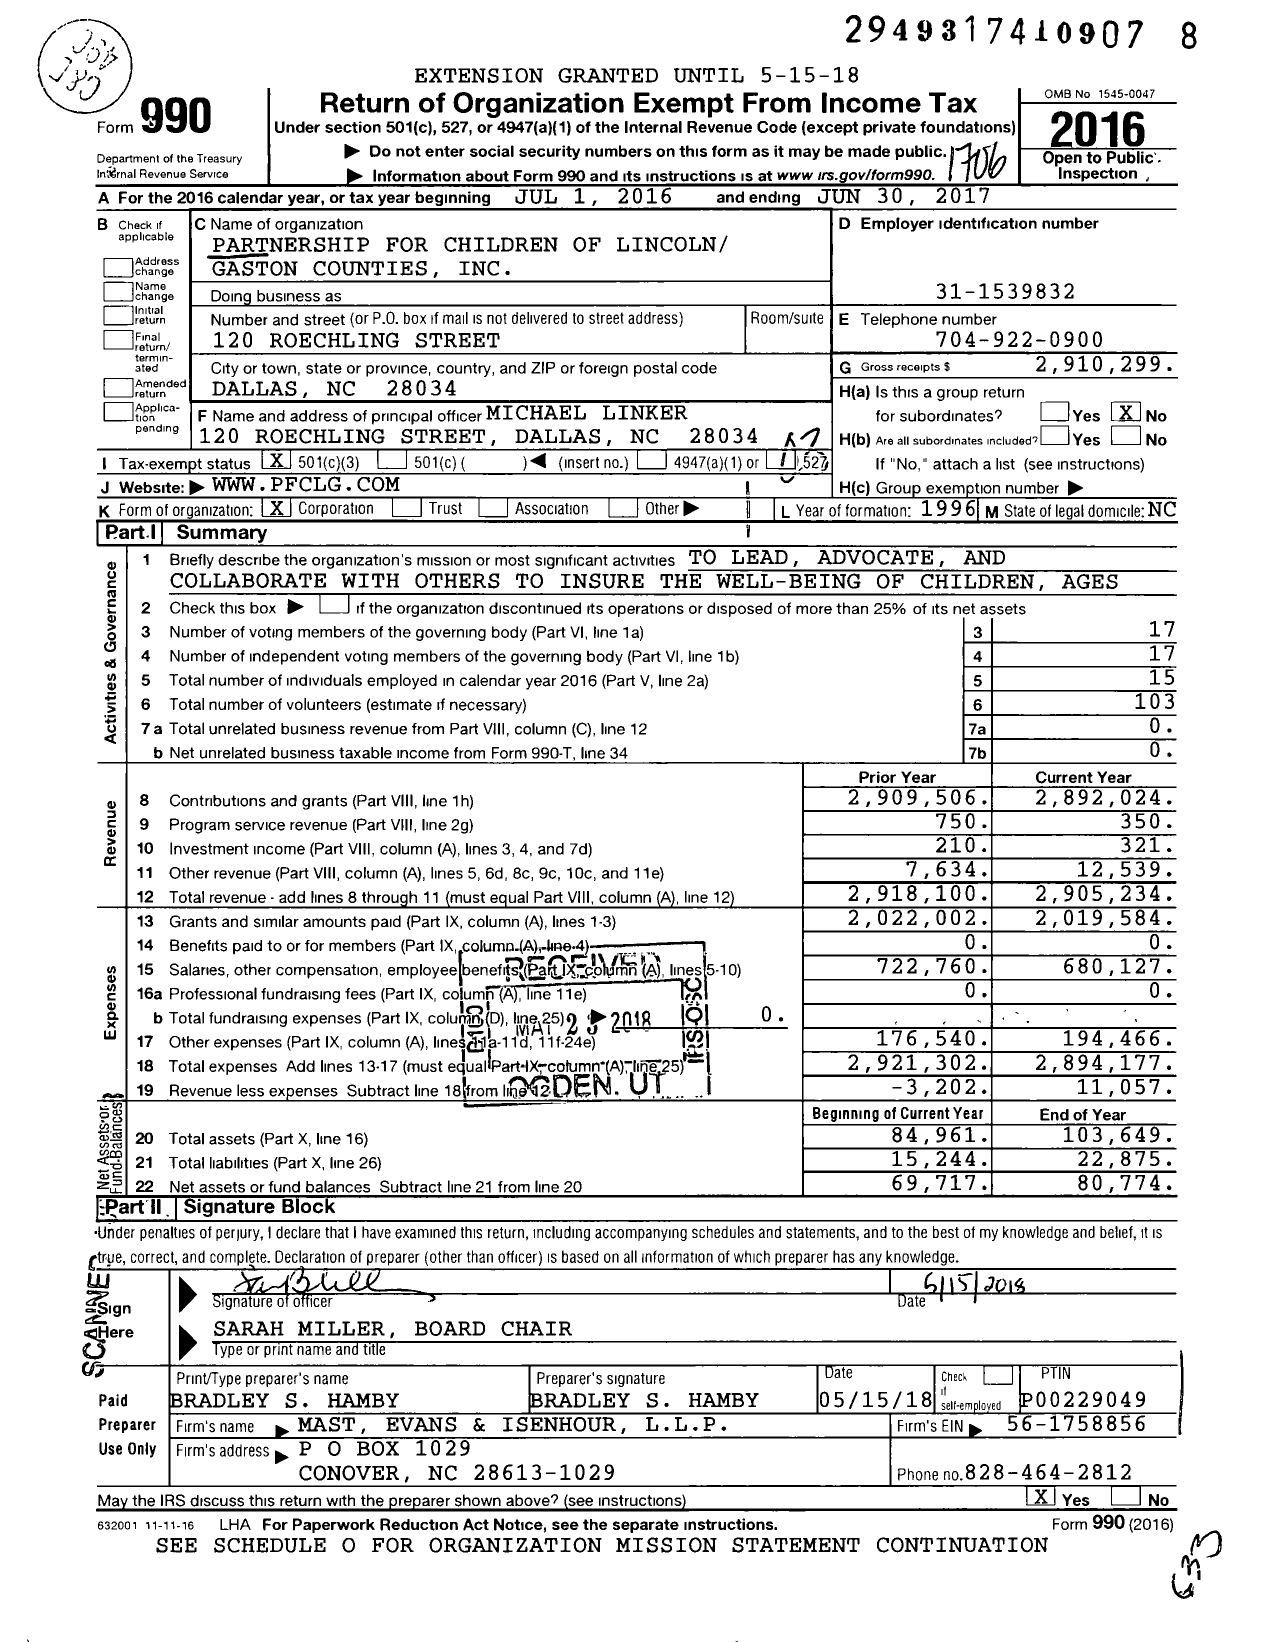 Image of first page of 2016 Form 990 for Partnership for Children of Lincoln and Gaston Counties (PFCLG)